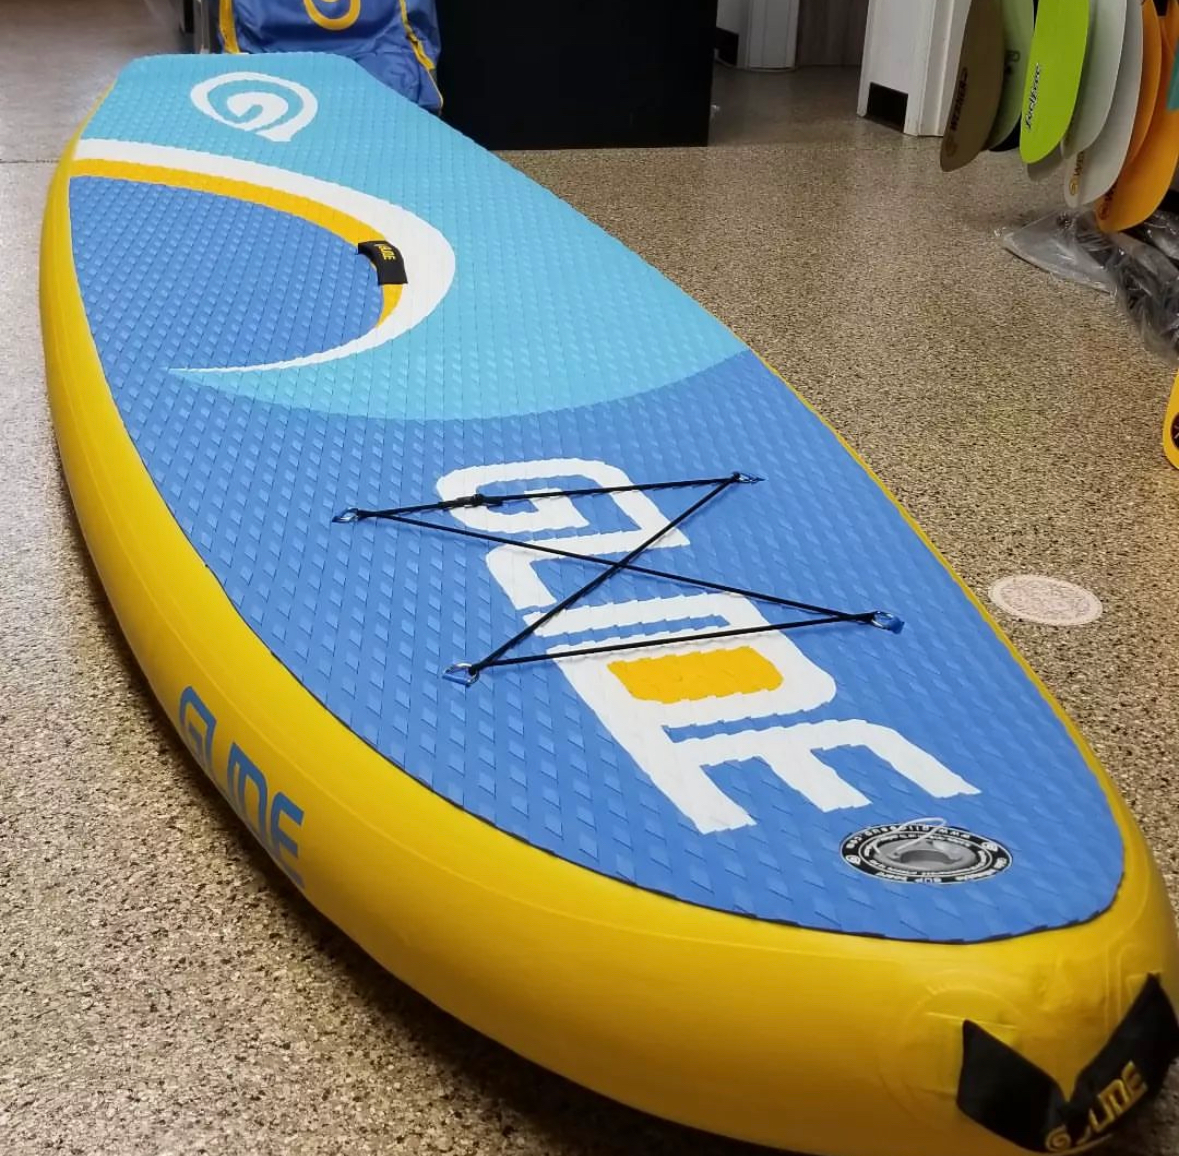 inflatable paddleboards vs rigid sup boards have good weight capacity 